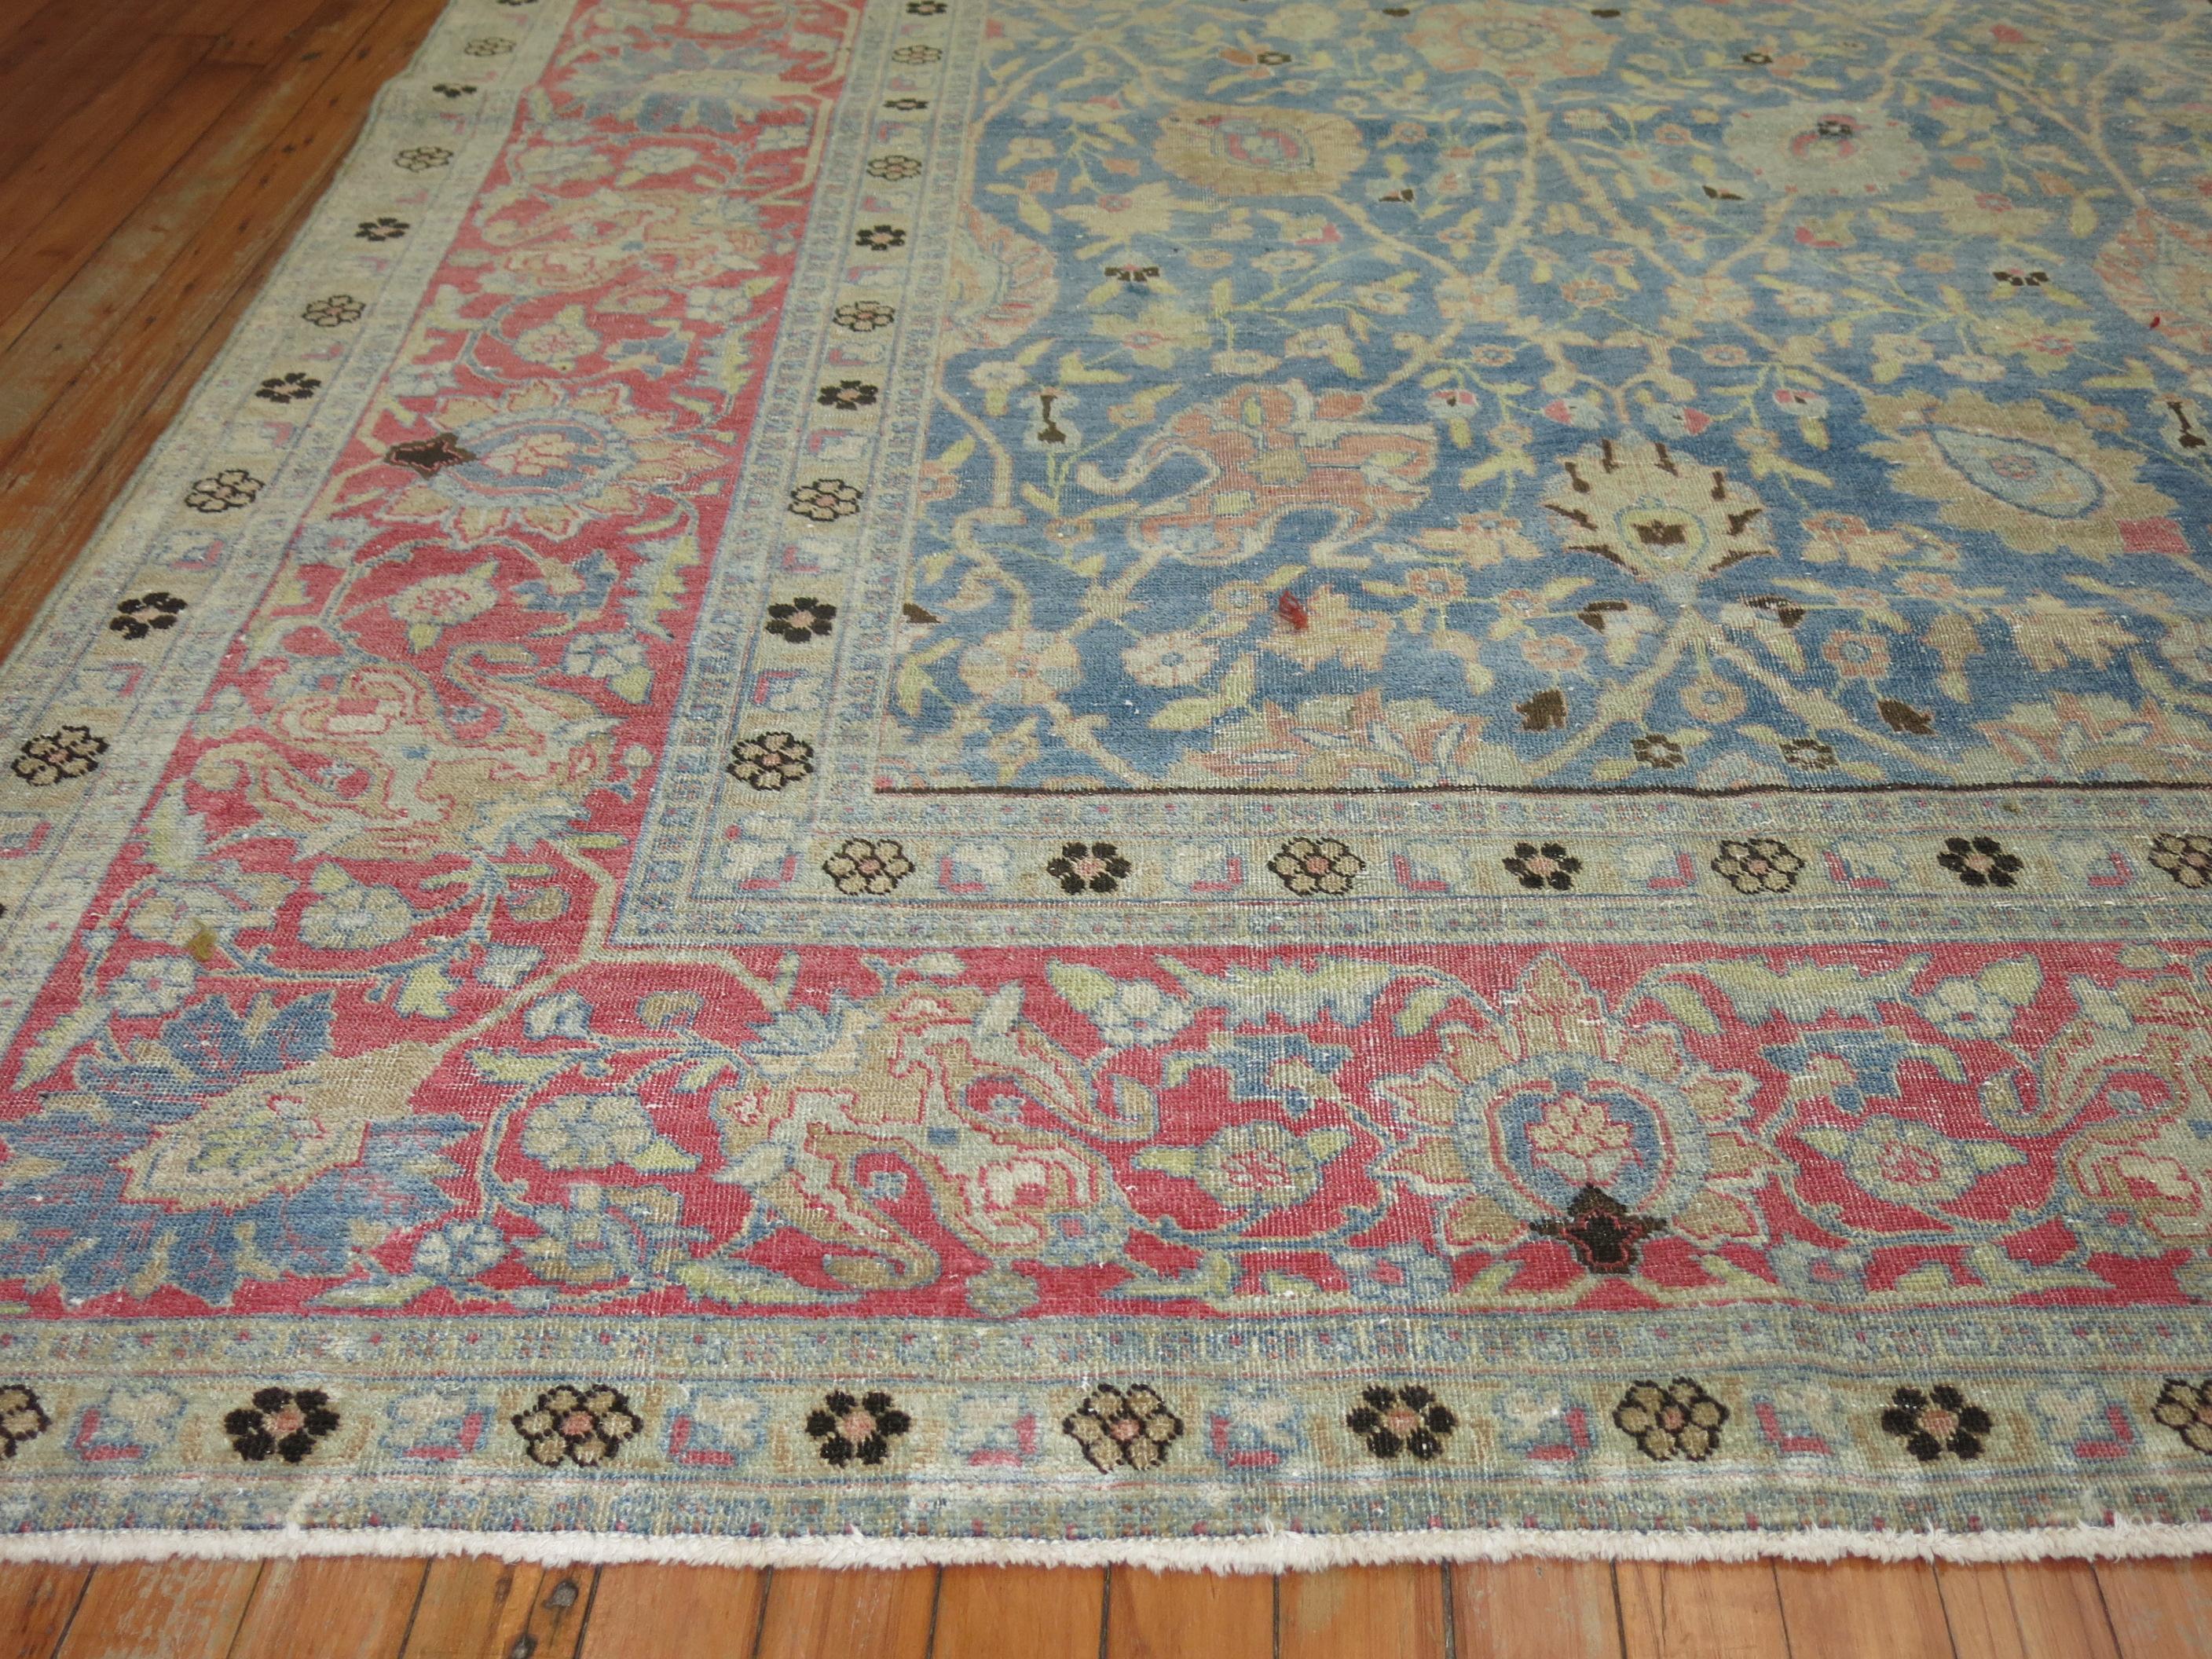 Hand-Woven Square Antique Persian Tabriz Rug in Blues and Pink